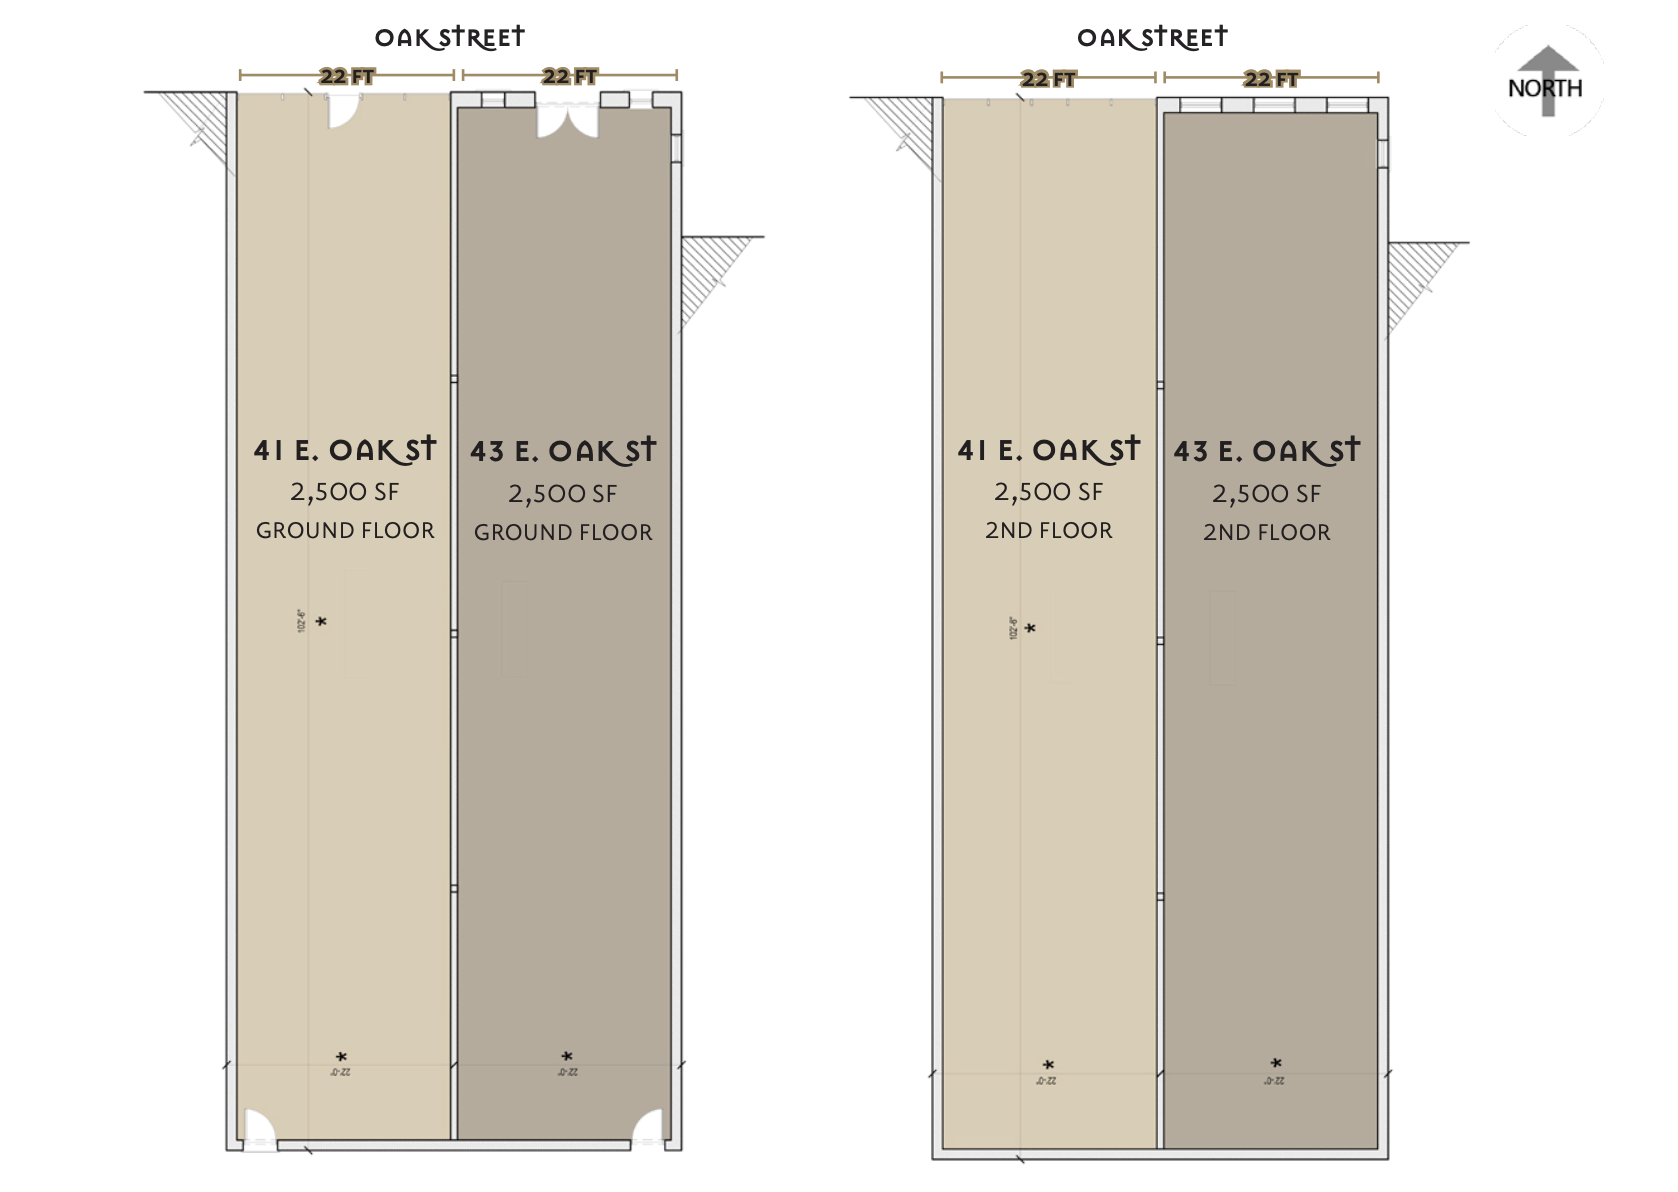 Floor plans for separate / two-tenant option